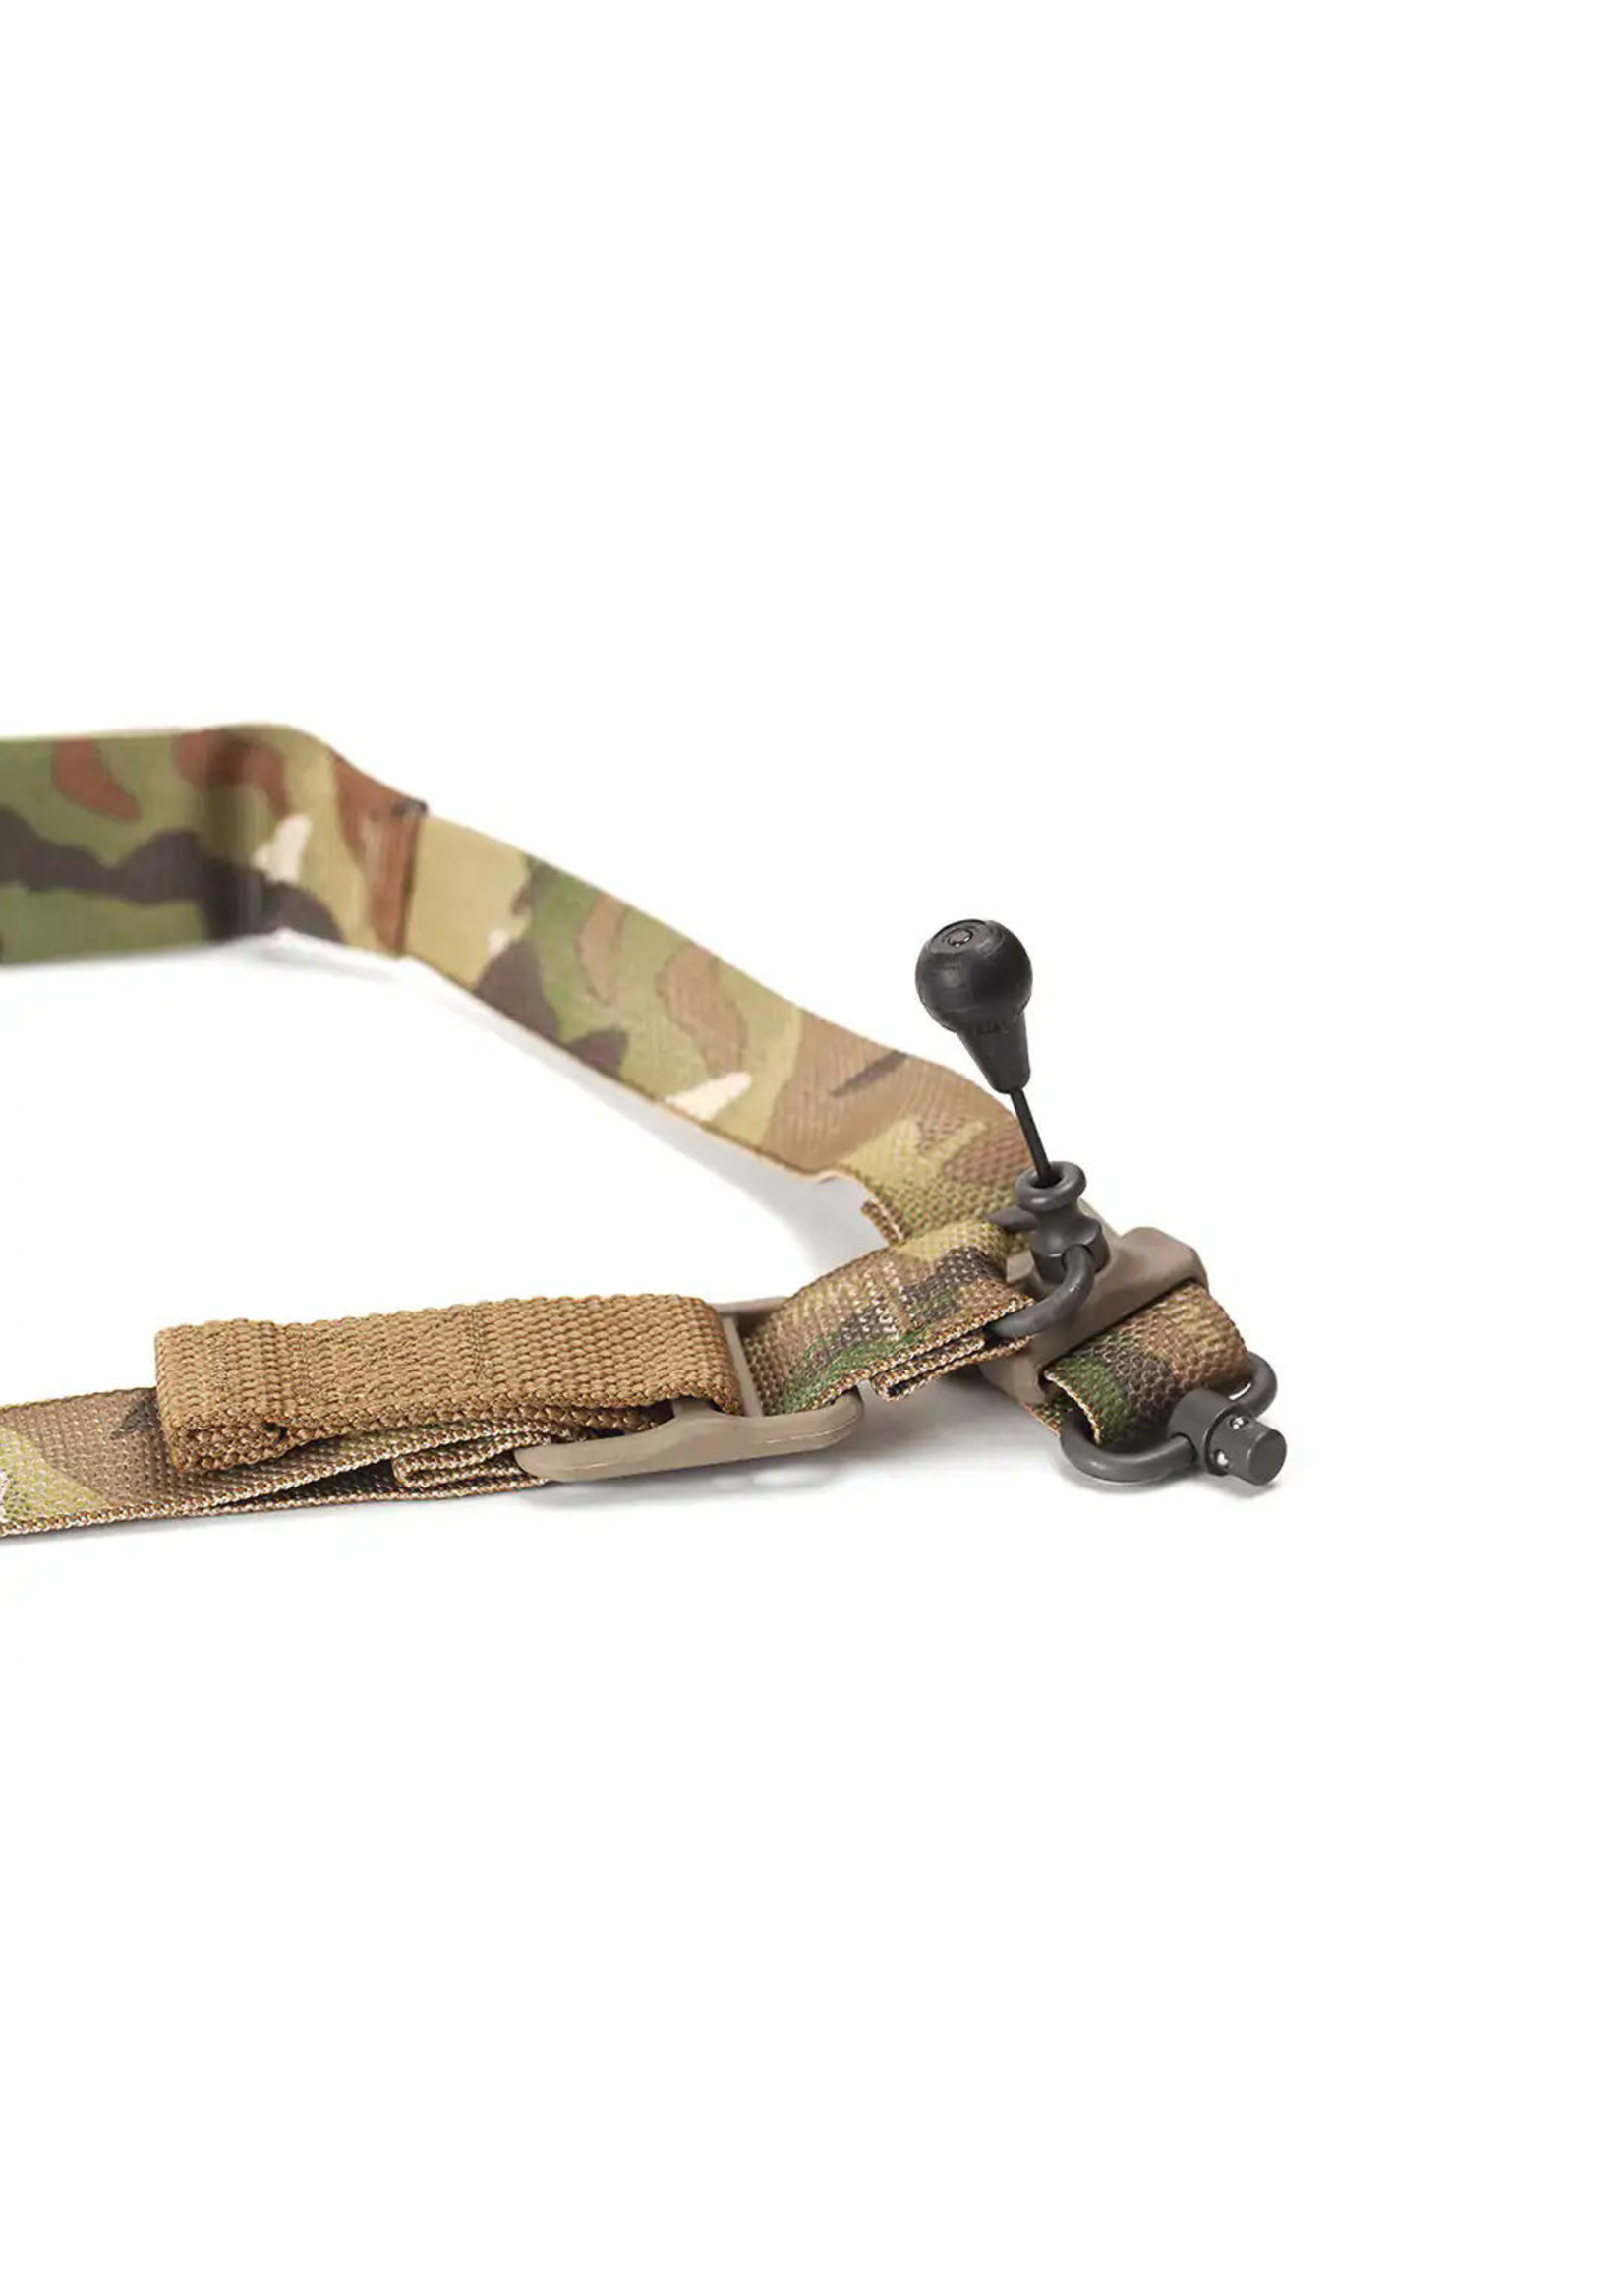 BLUE FORCE GEAR VICKERS 221 PADDED SLING